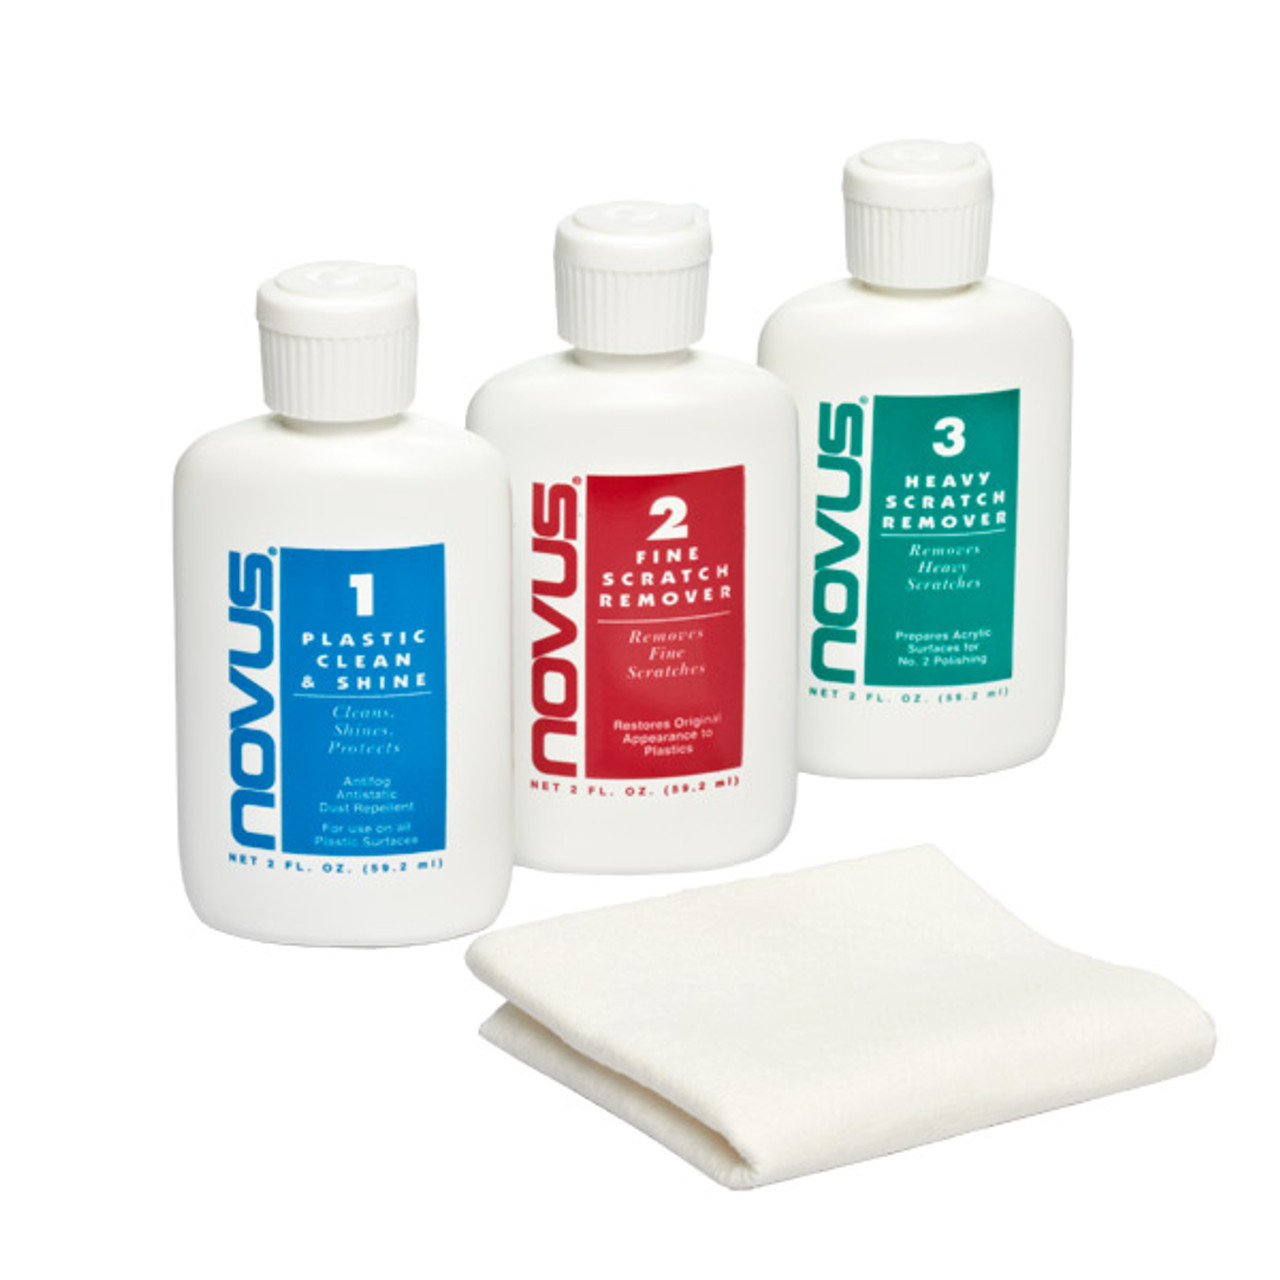 Stauber Furnishings Acrylix - Polishing and Scratch Removal Kit for Acrylic, Plexiglass, Lucite